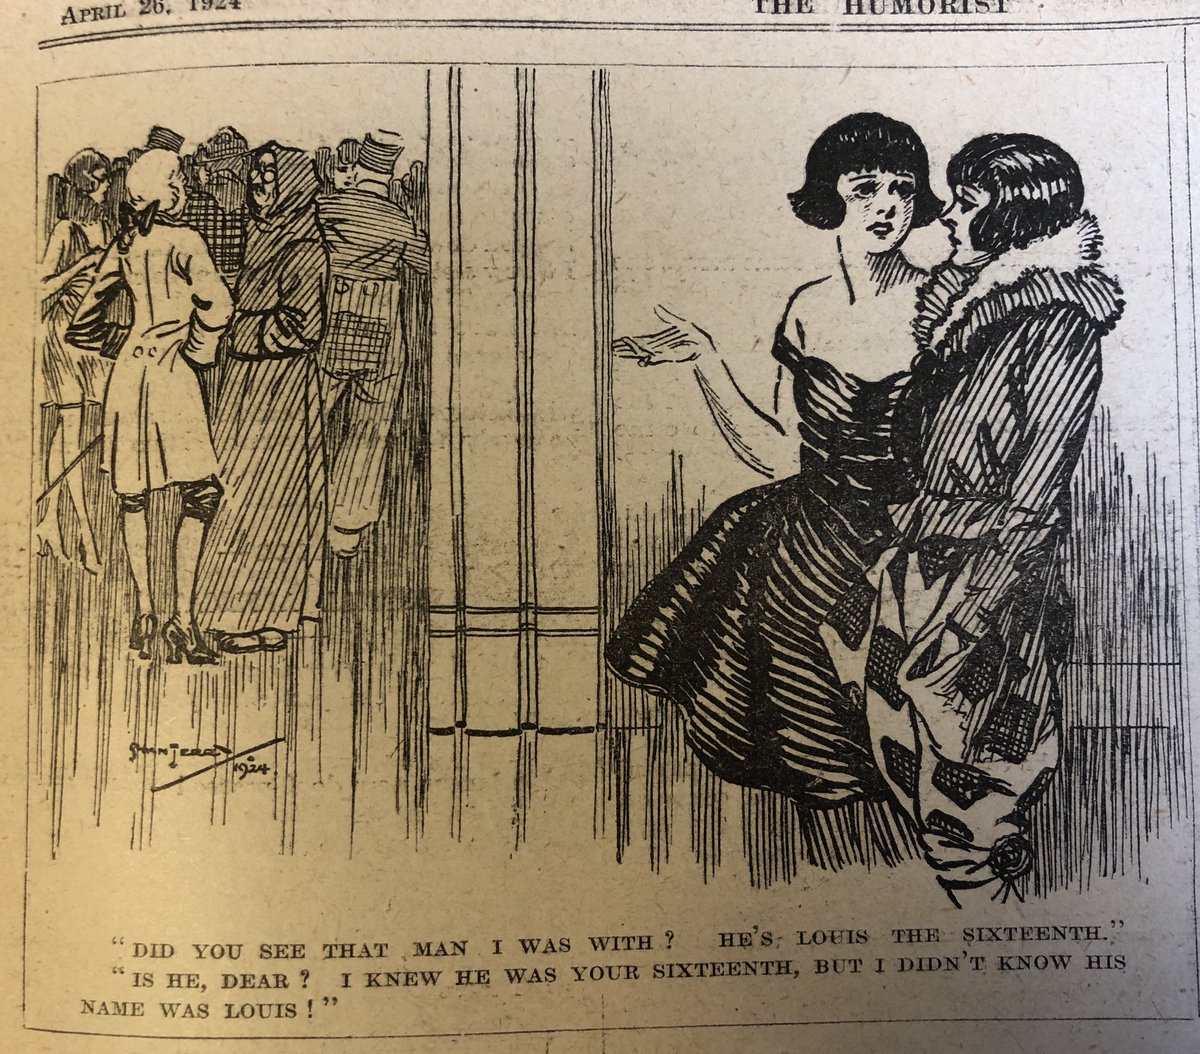 Not Victorian, but definitely a sick burn!“Did you see that man I was with? He’s Louis the Sixteenth.”“Is he, dear? I knew he was your sixteenth, but I didn’t know his name was Louis!”- The Humorist (1924)